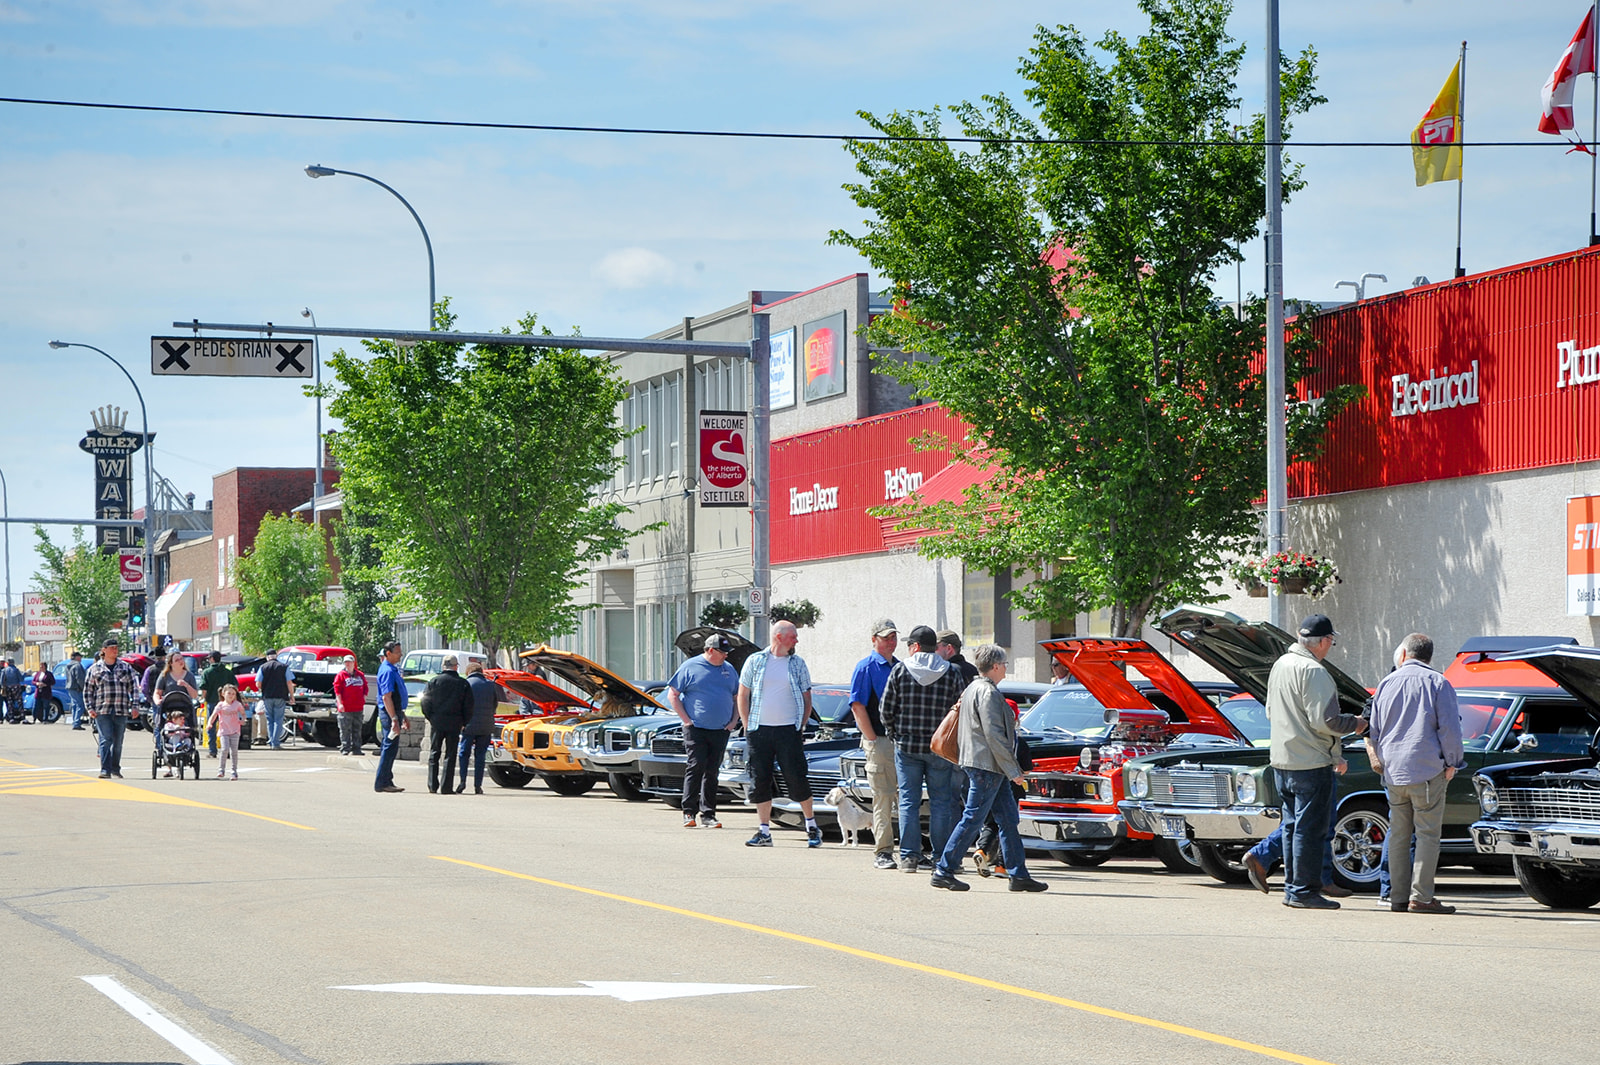 Stettler Show N Shine on north end of main street.